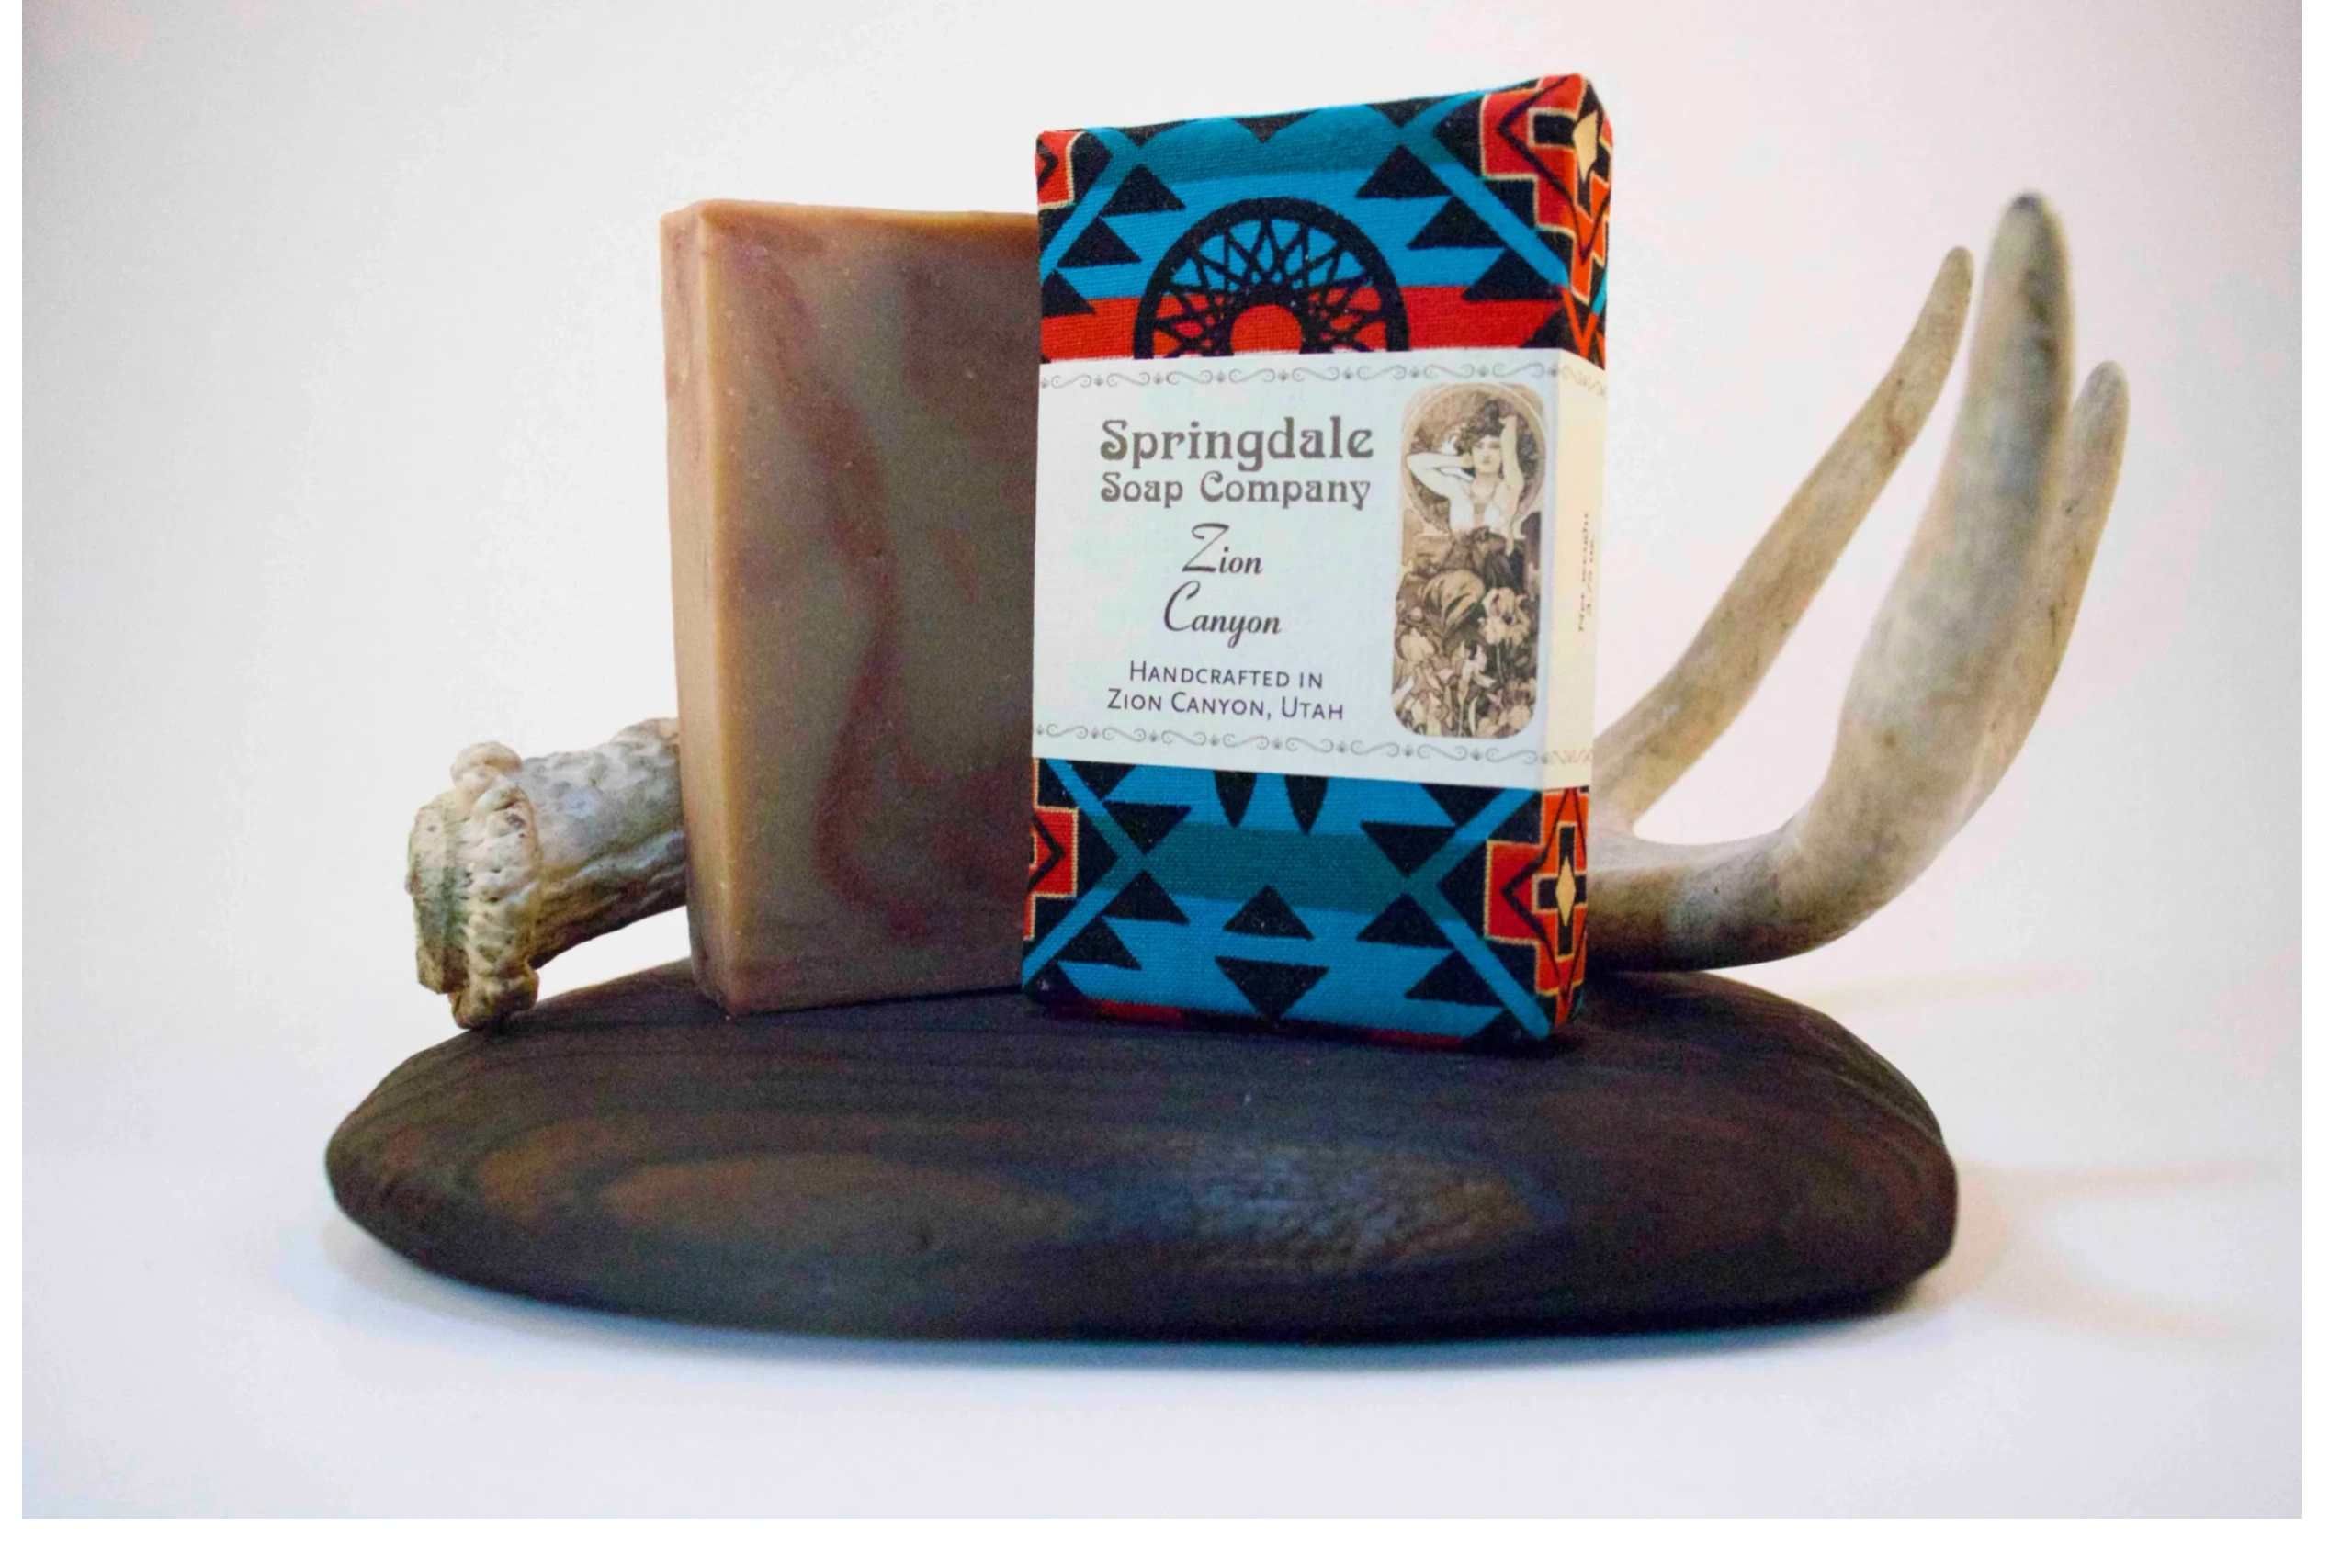 Zion Canyon Soap made by Springdale Soap Company